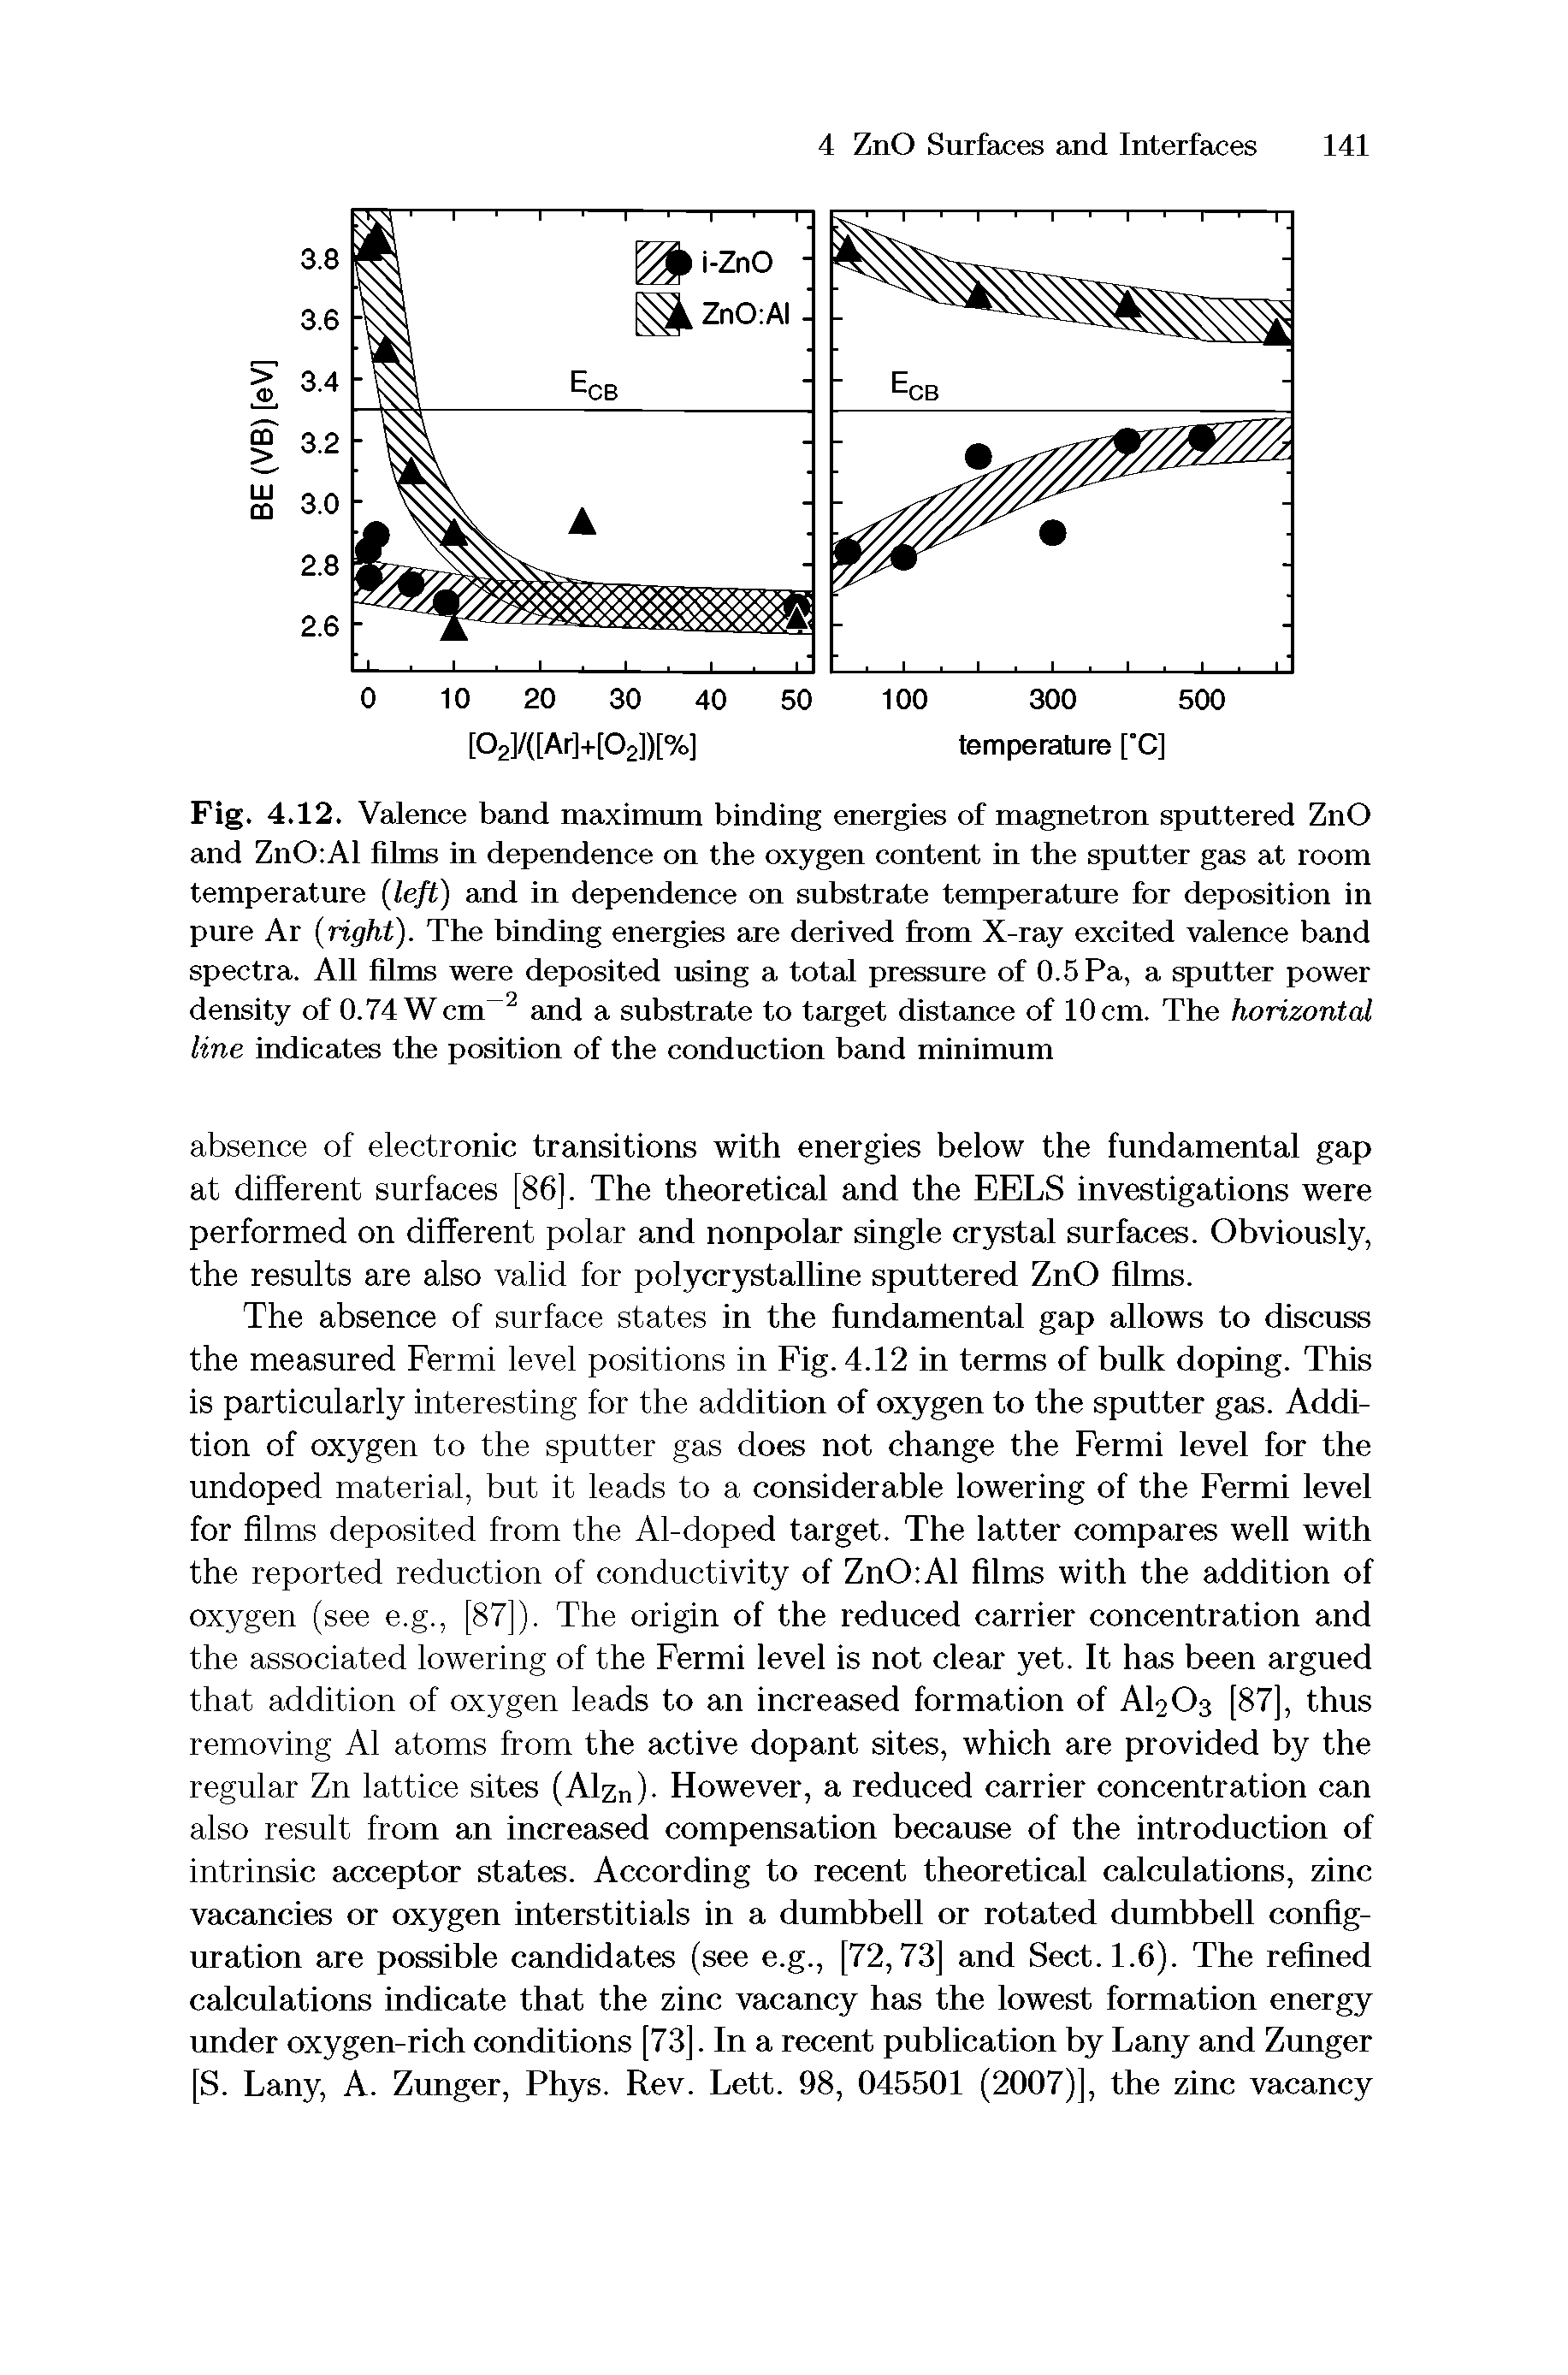 Fig. 4.12. Valence band maximum binding energies of magnetron sputtered ZnO and ZnO Al films in dependence on the oxygen content in the sputter gas at room temperature (left) and in dependence on substrate temperature for deposition in pure Ar (right). The binding energies are derived from X-ray excited valence band spectra. All films were deposited using a total pressure of 0.5 Pa, a sputter power density of 0.74 Wcm 2 and a substrate to target distance of 10 cm. The horizontal line indicates the position of the conduction band minimum...